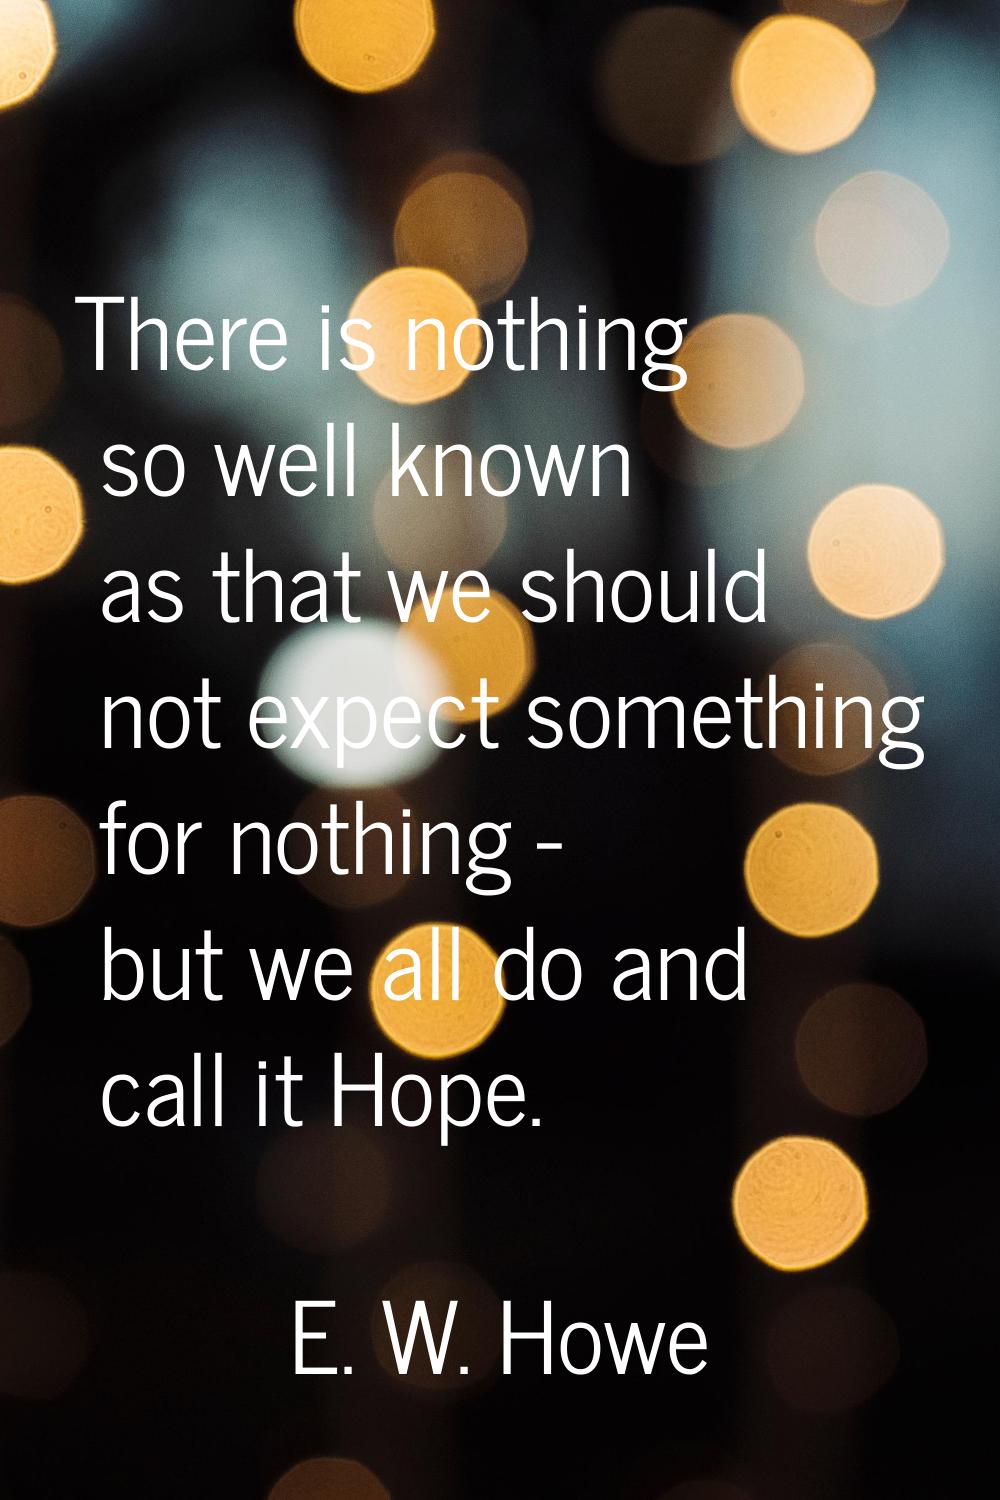 There is nothing so well known as that we should not expect something for nothing - but we all do a